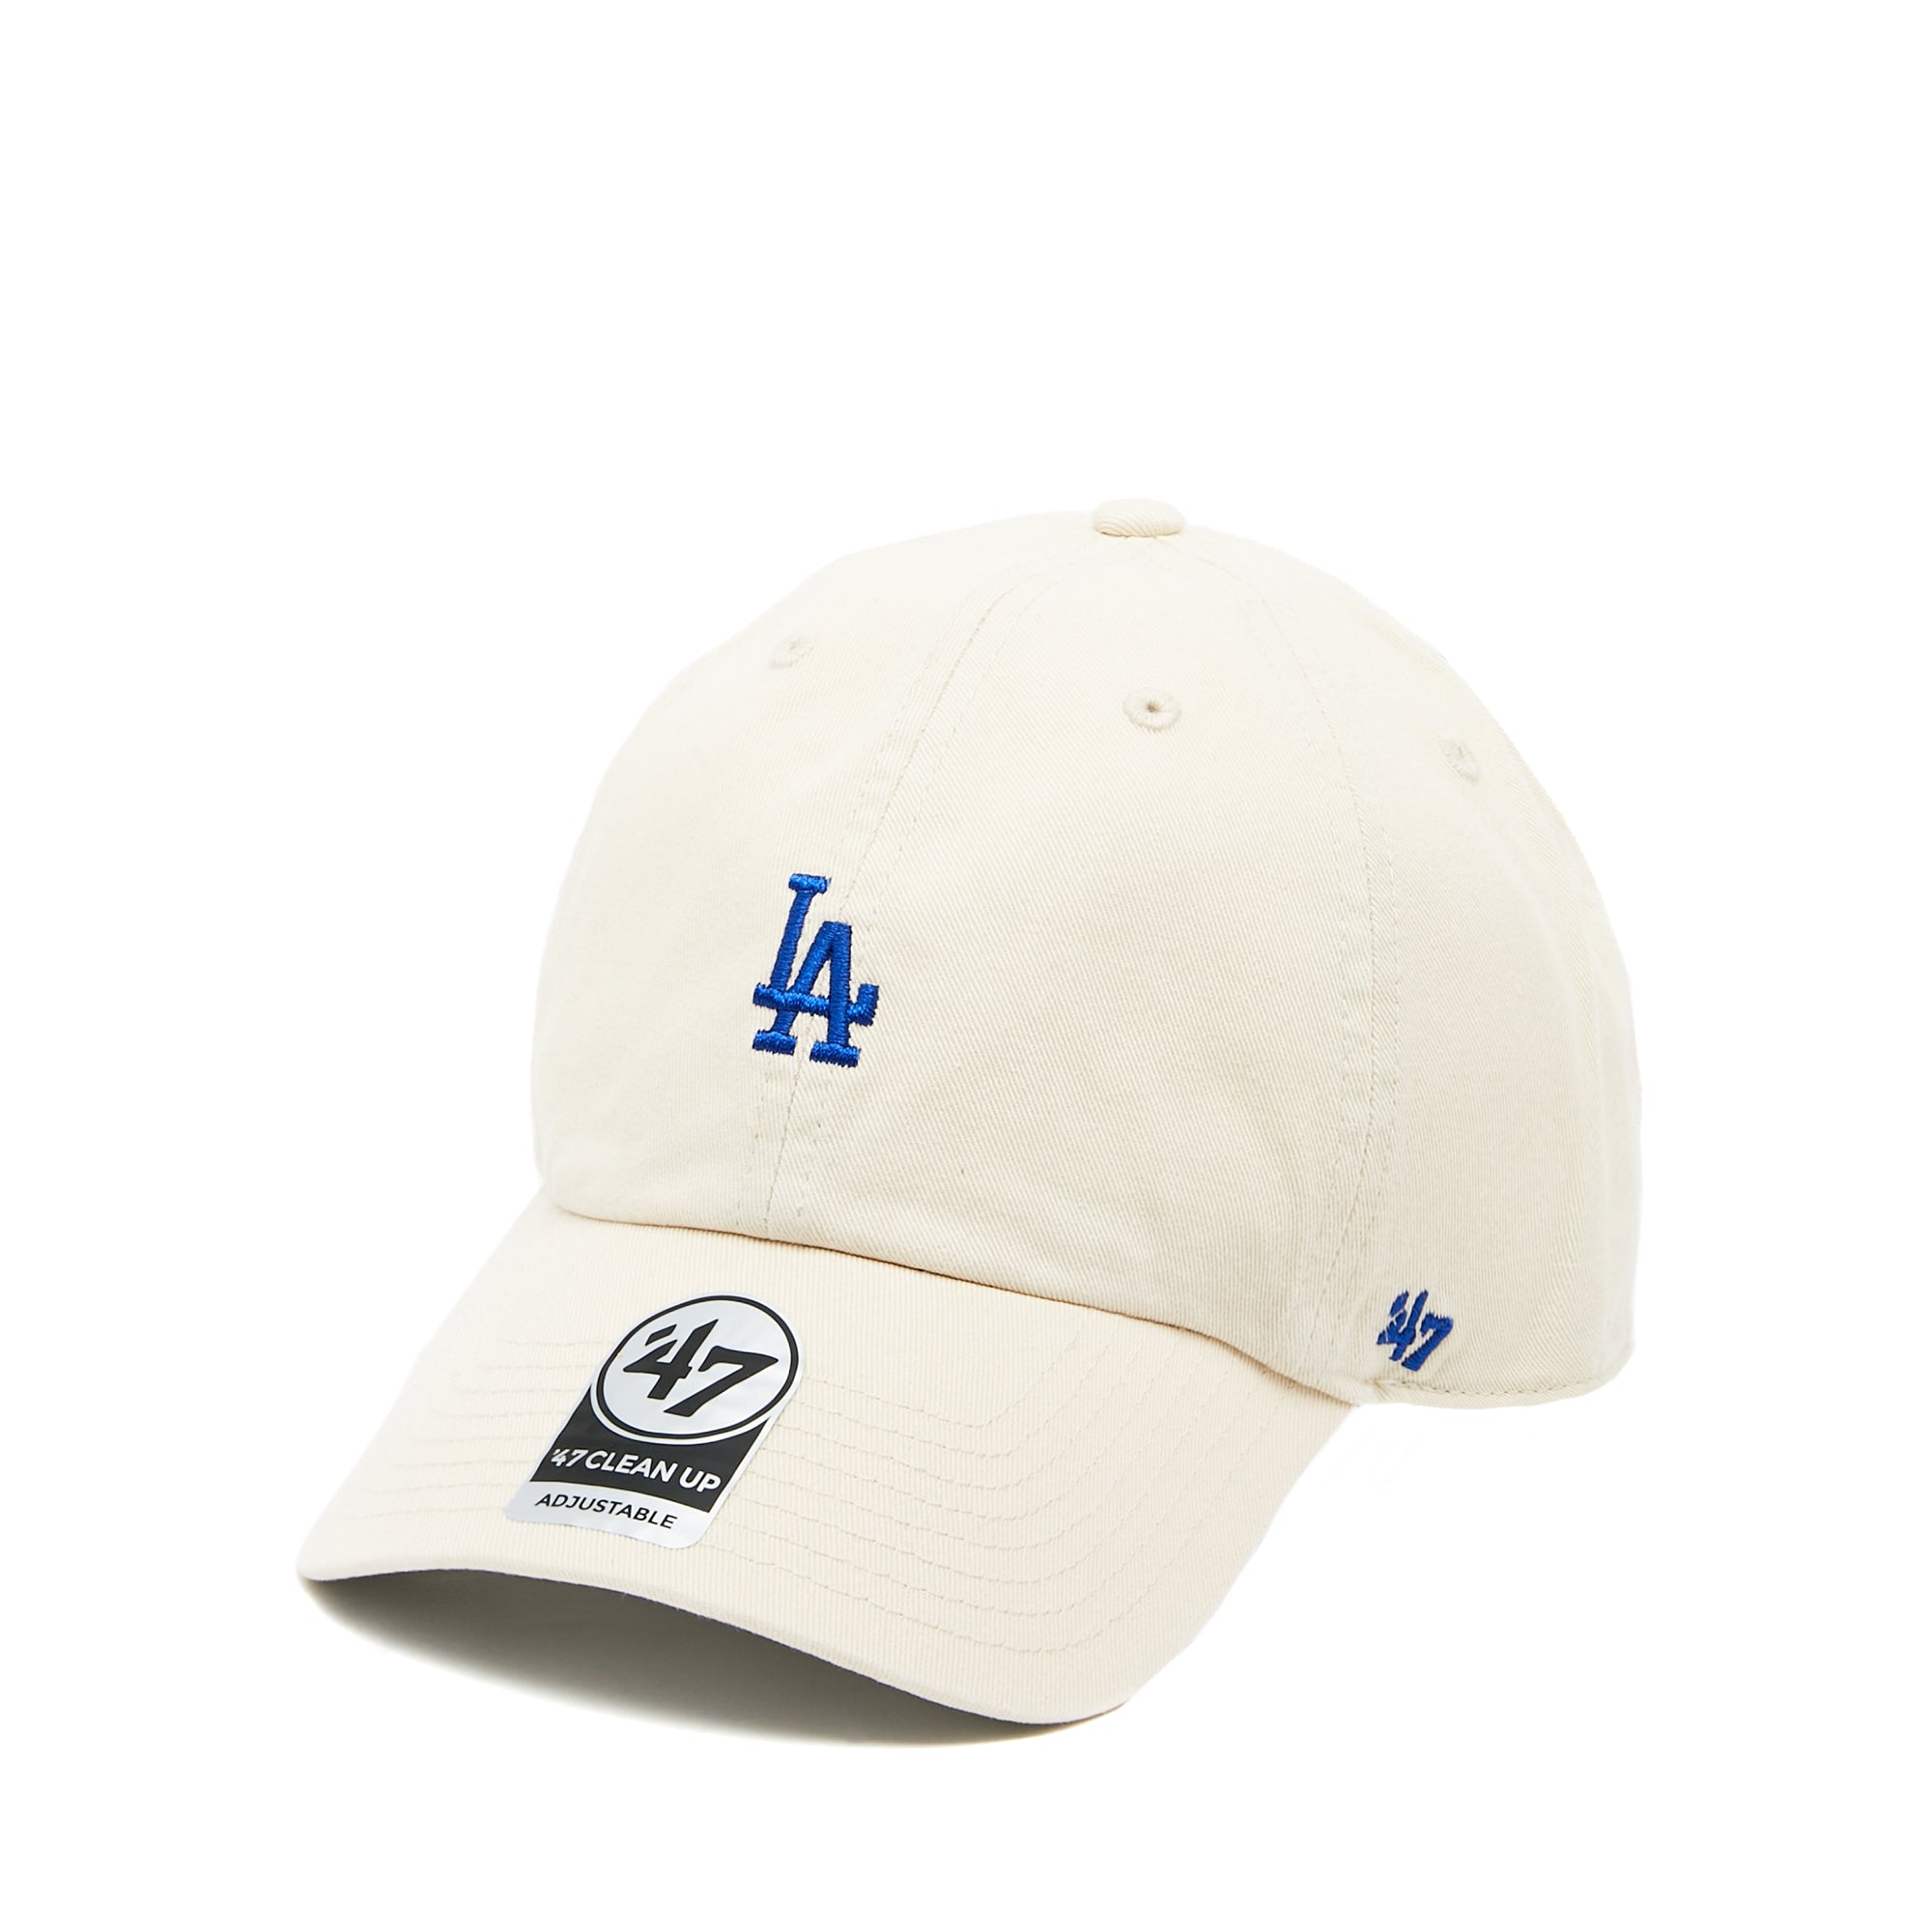 MLB Los Angeles Dodgers Base Runner Cap Natural One Size